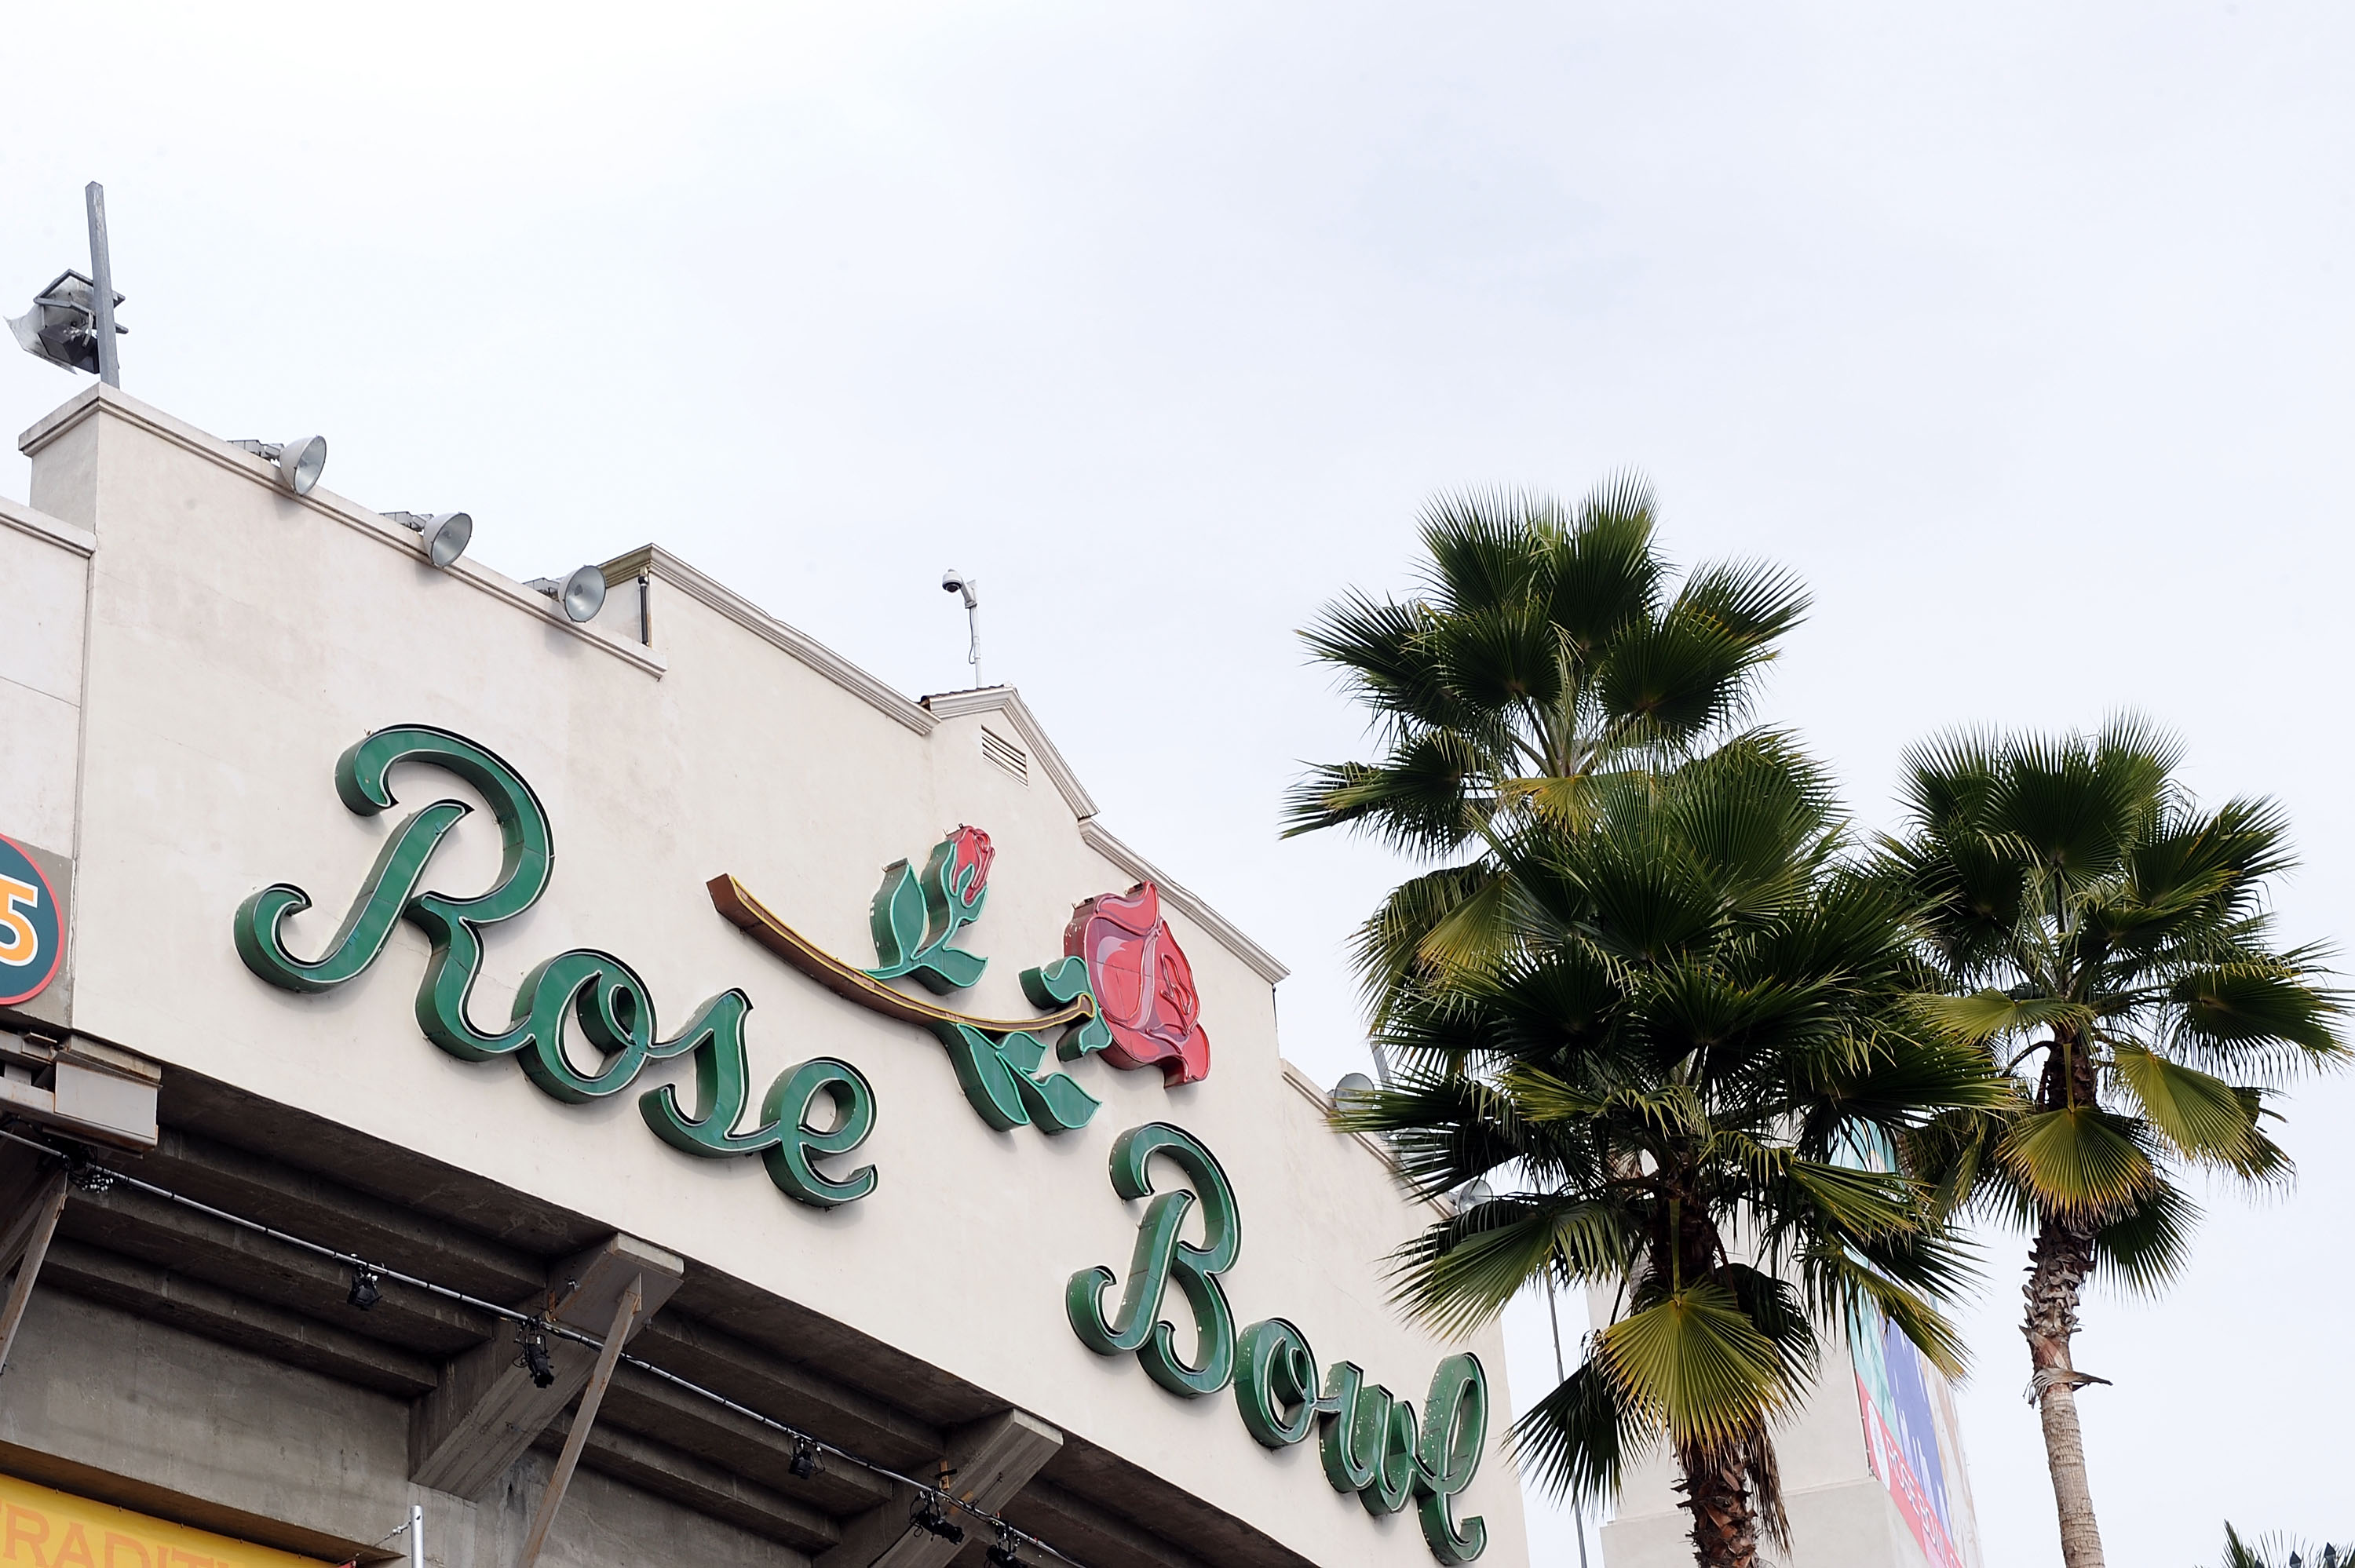 Rose Bowl 2022: Utah vs Ohio State State Date, Time, TV, Weather & History for NCAA College Football Game